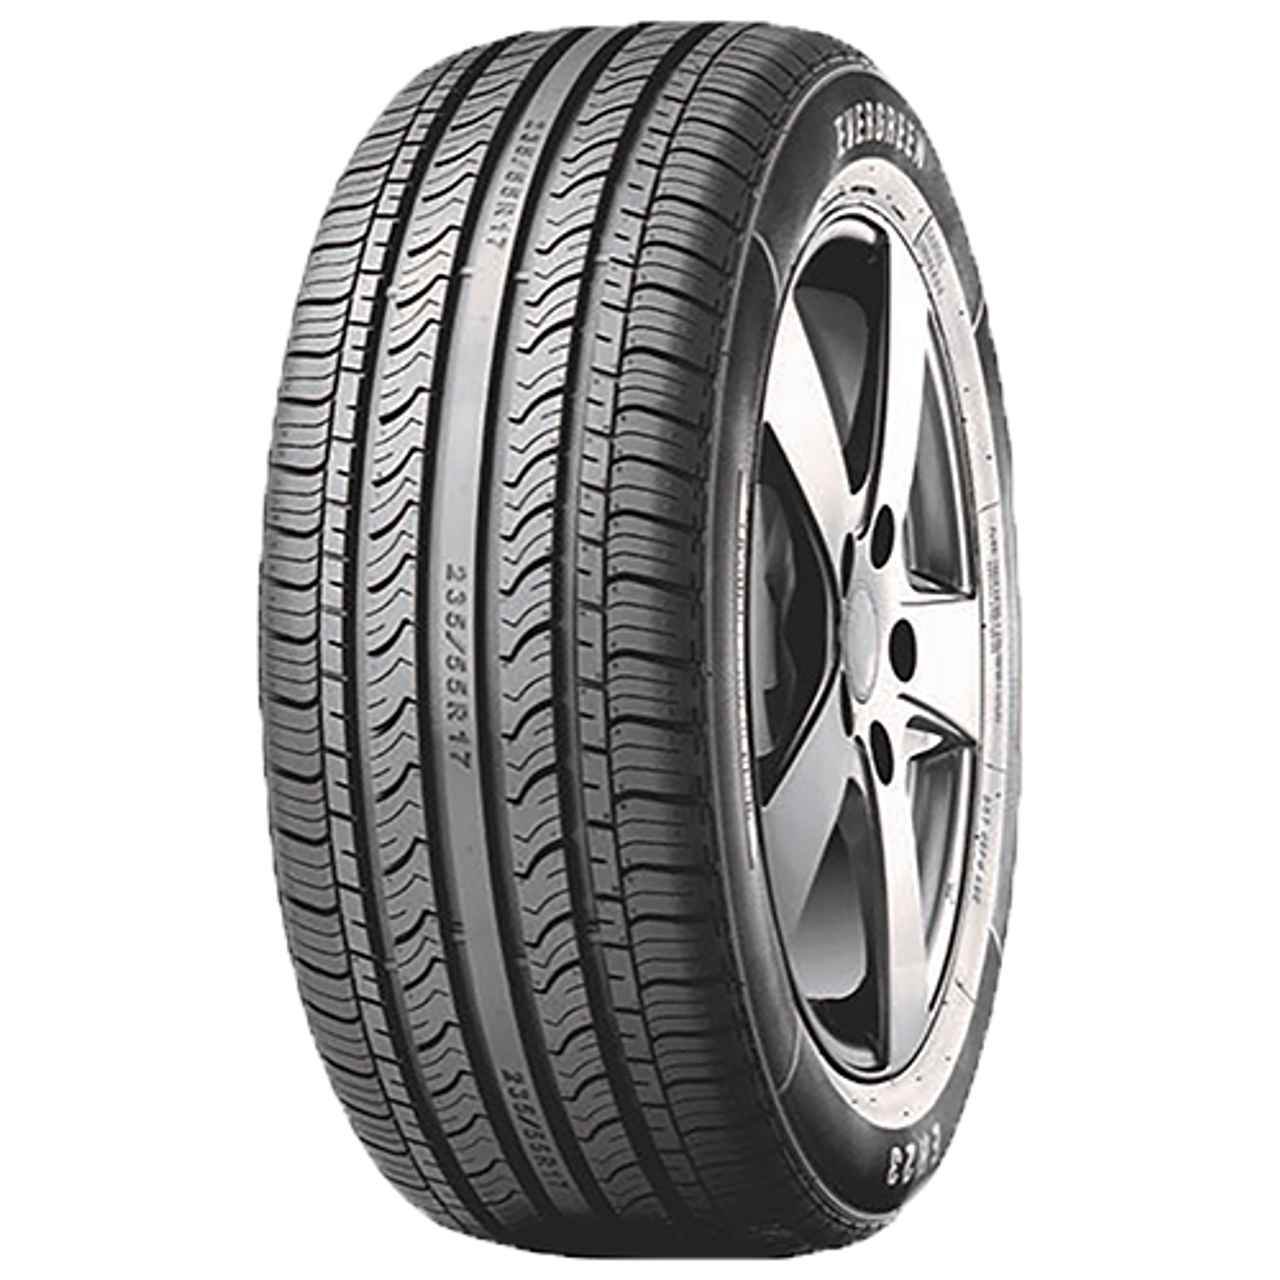 EVERGREEN EH23 185/60R15 84H BSW